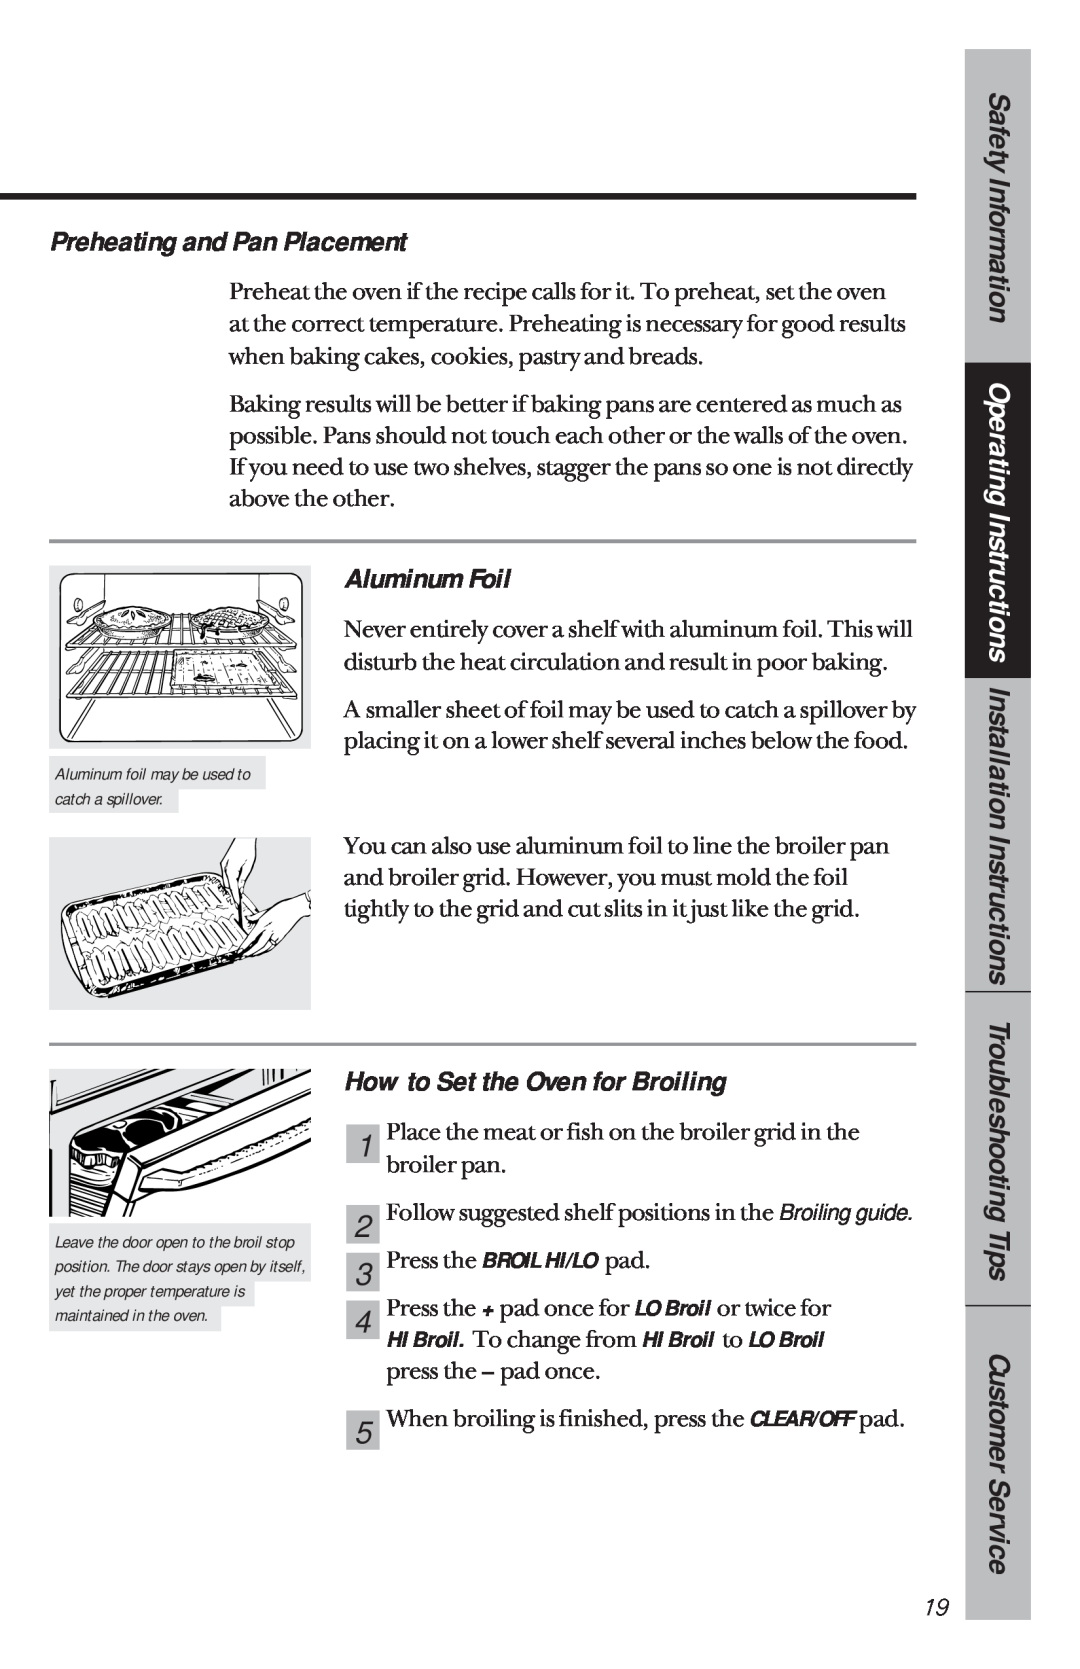 GE 164D3333P034, 49-8780 manual Preheating and Pan Placement, Aluminum Foil, How to Set the Oven for Broiling 